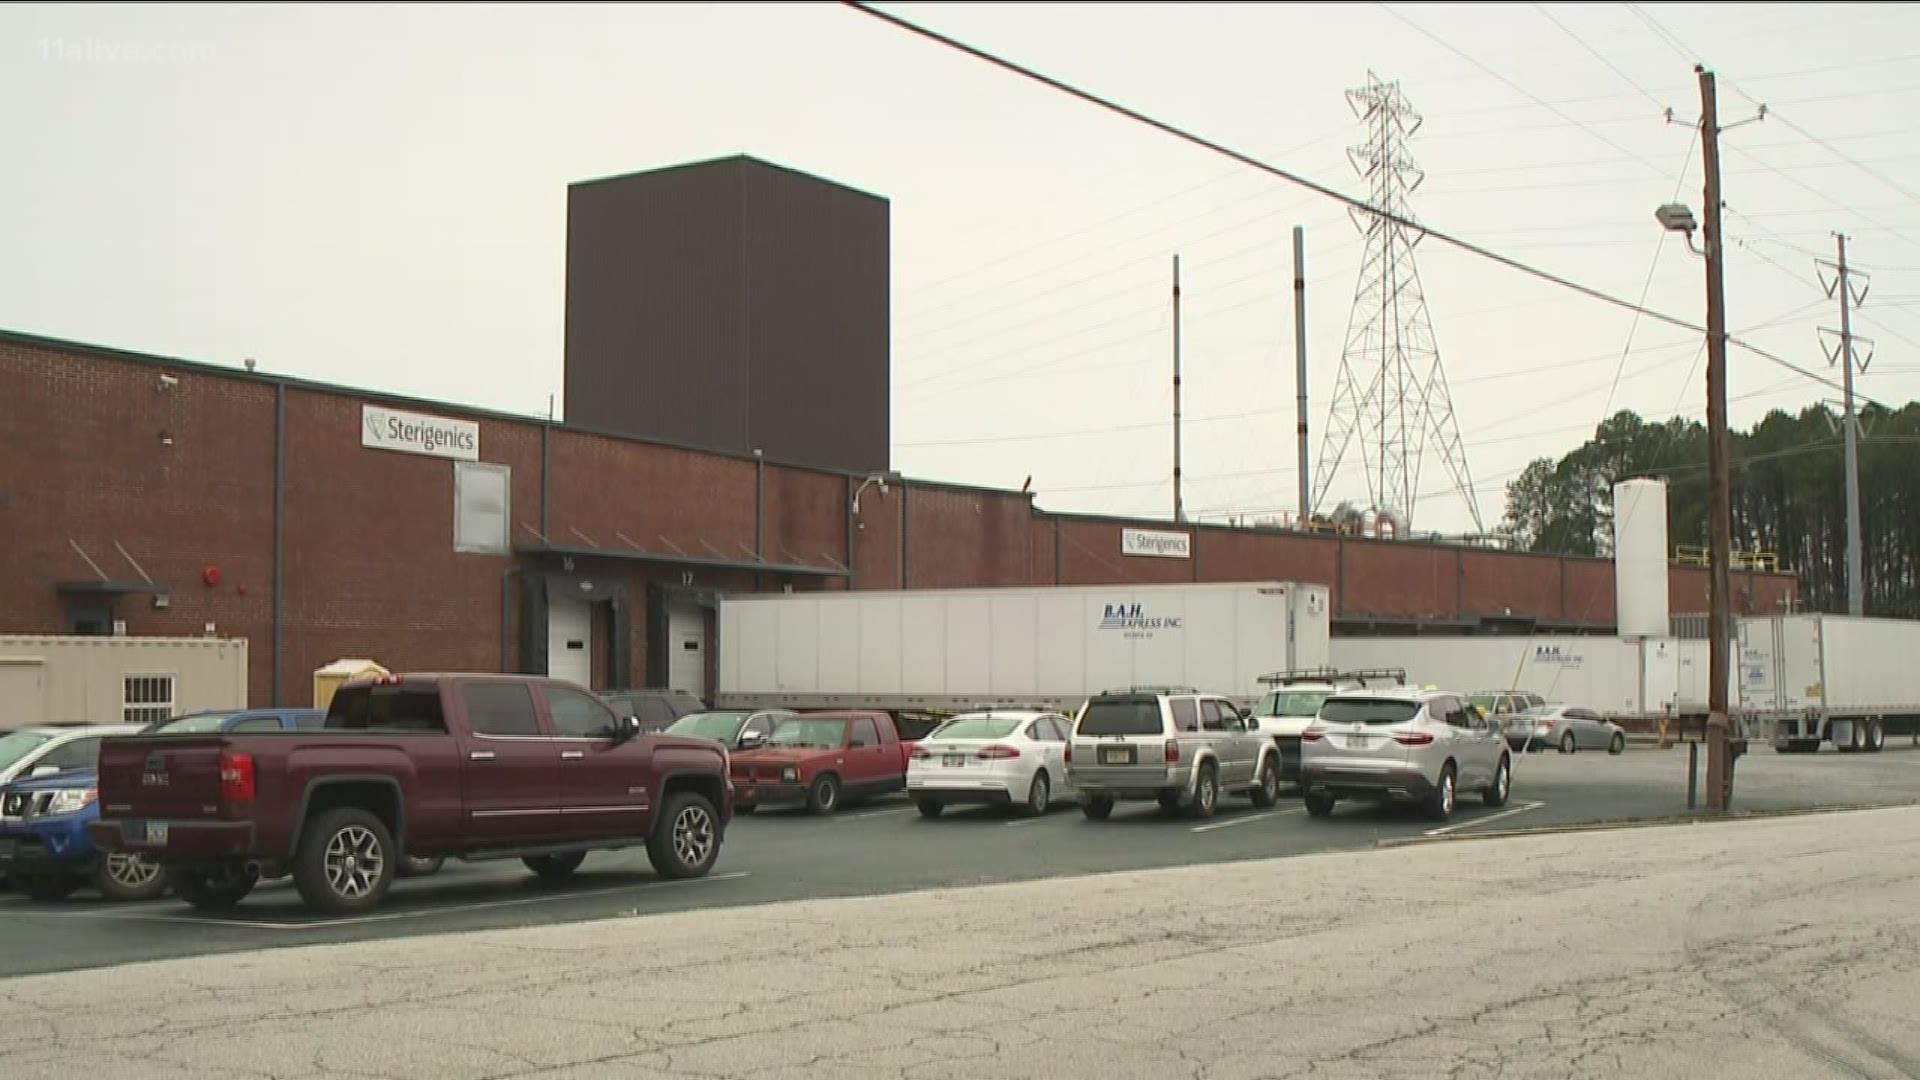 State and Cobb County authorities intervened to stop the Sterigenics plant near Smyrna from running tests on Thursday.